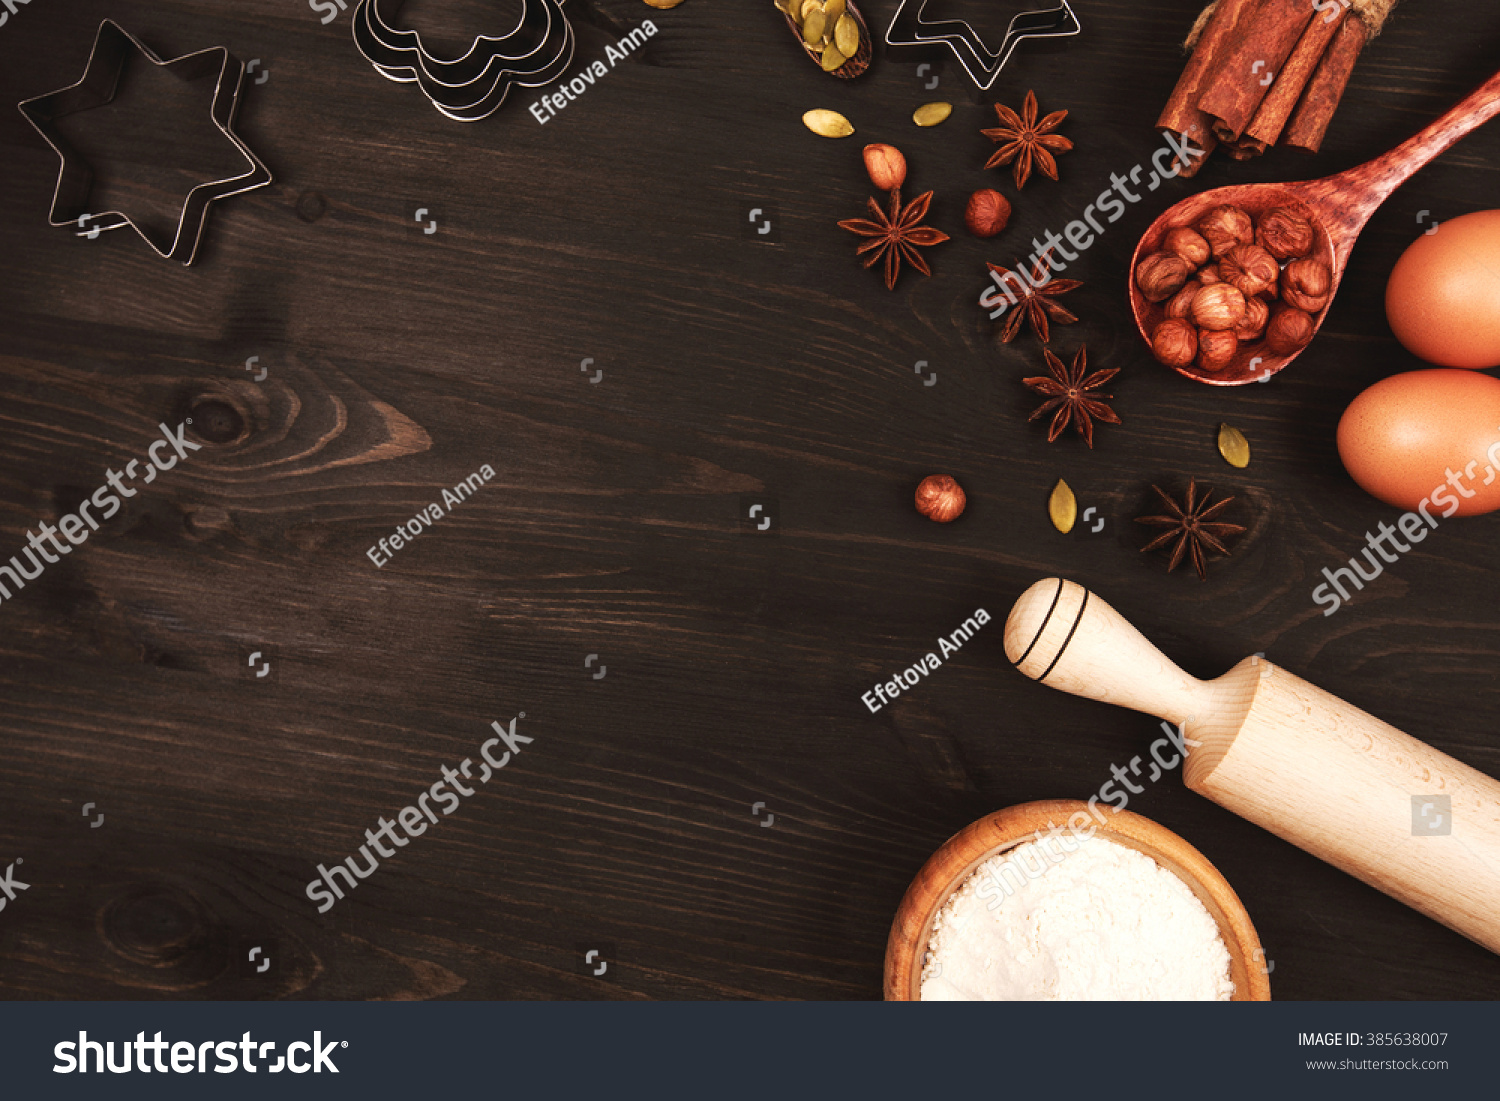 Ingredients and kitchen utensils for cooking #385638007